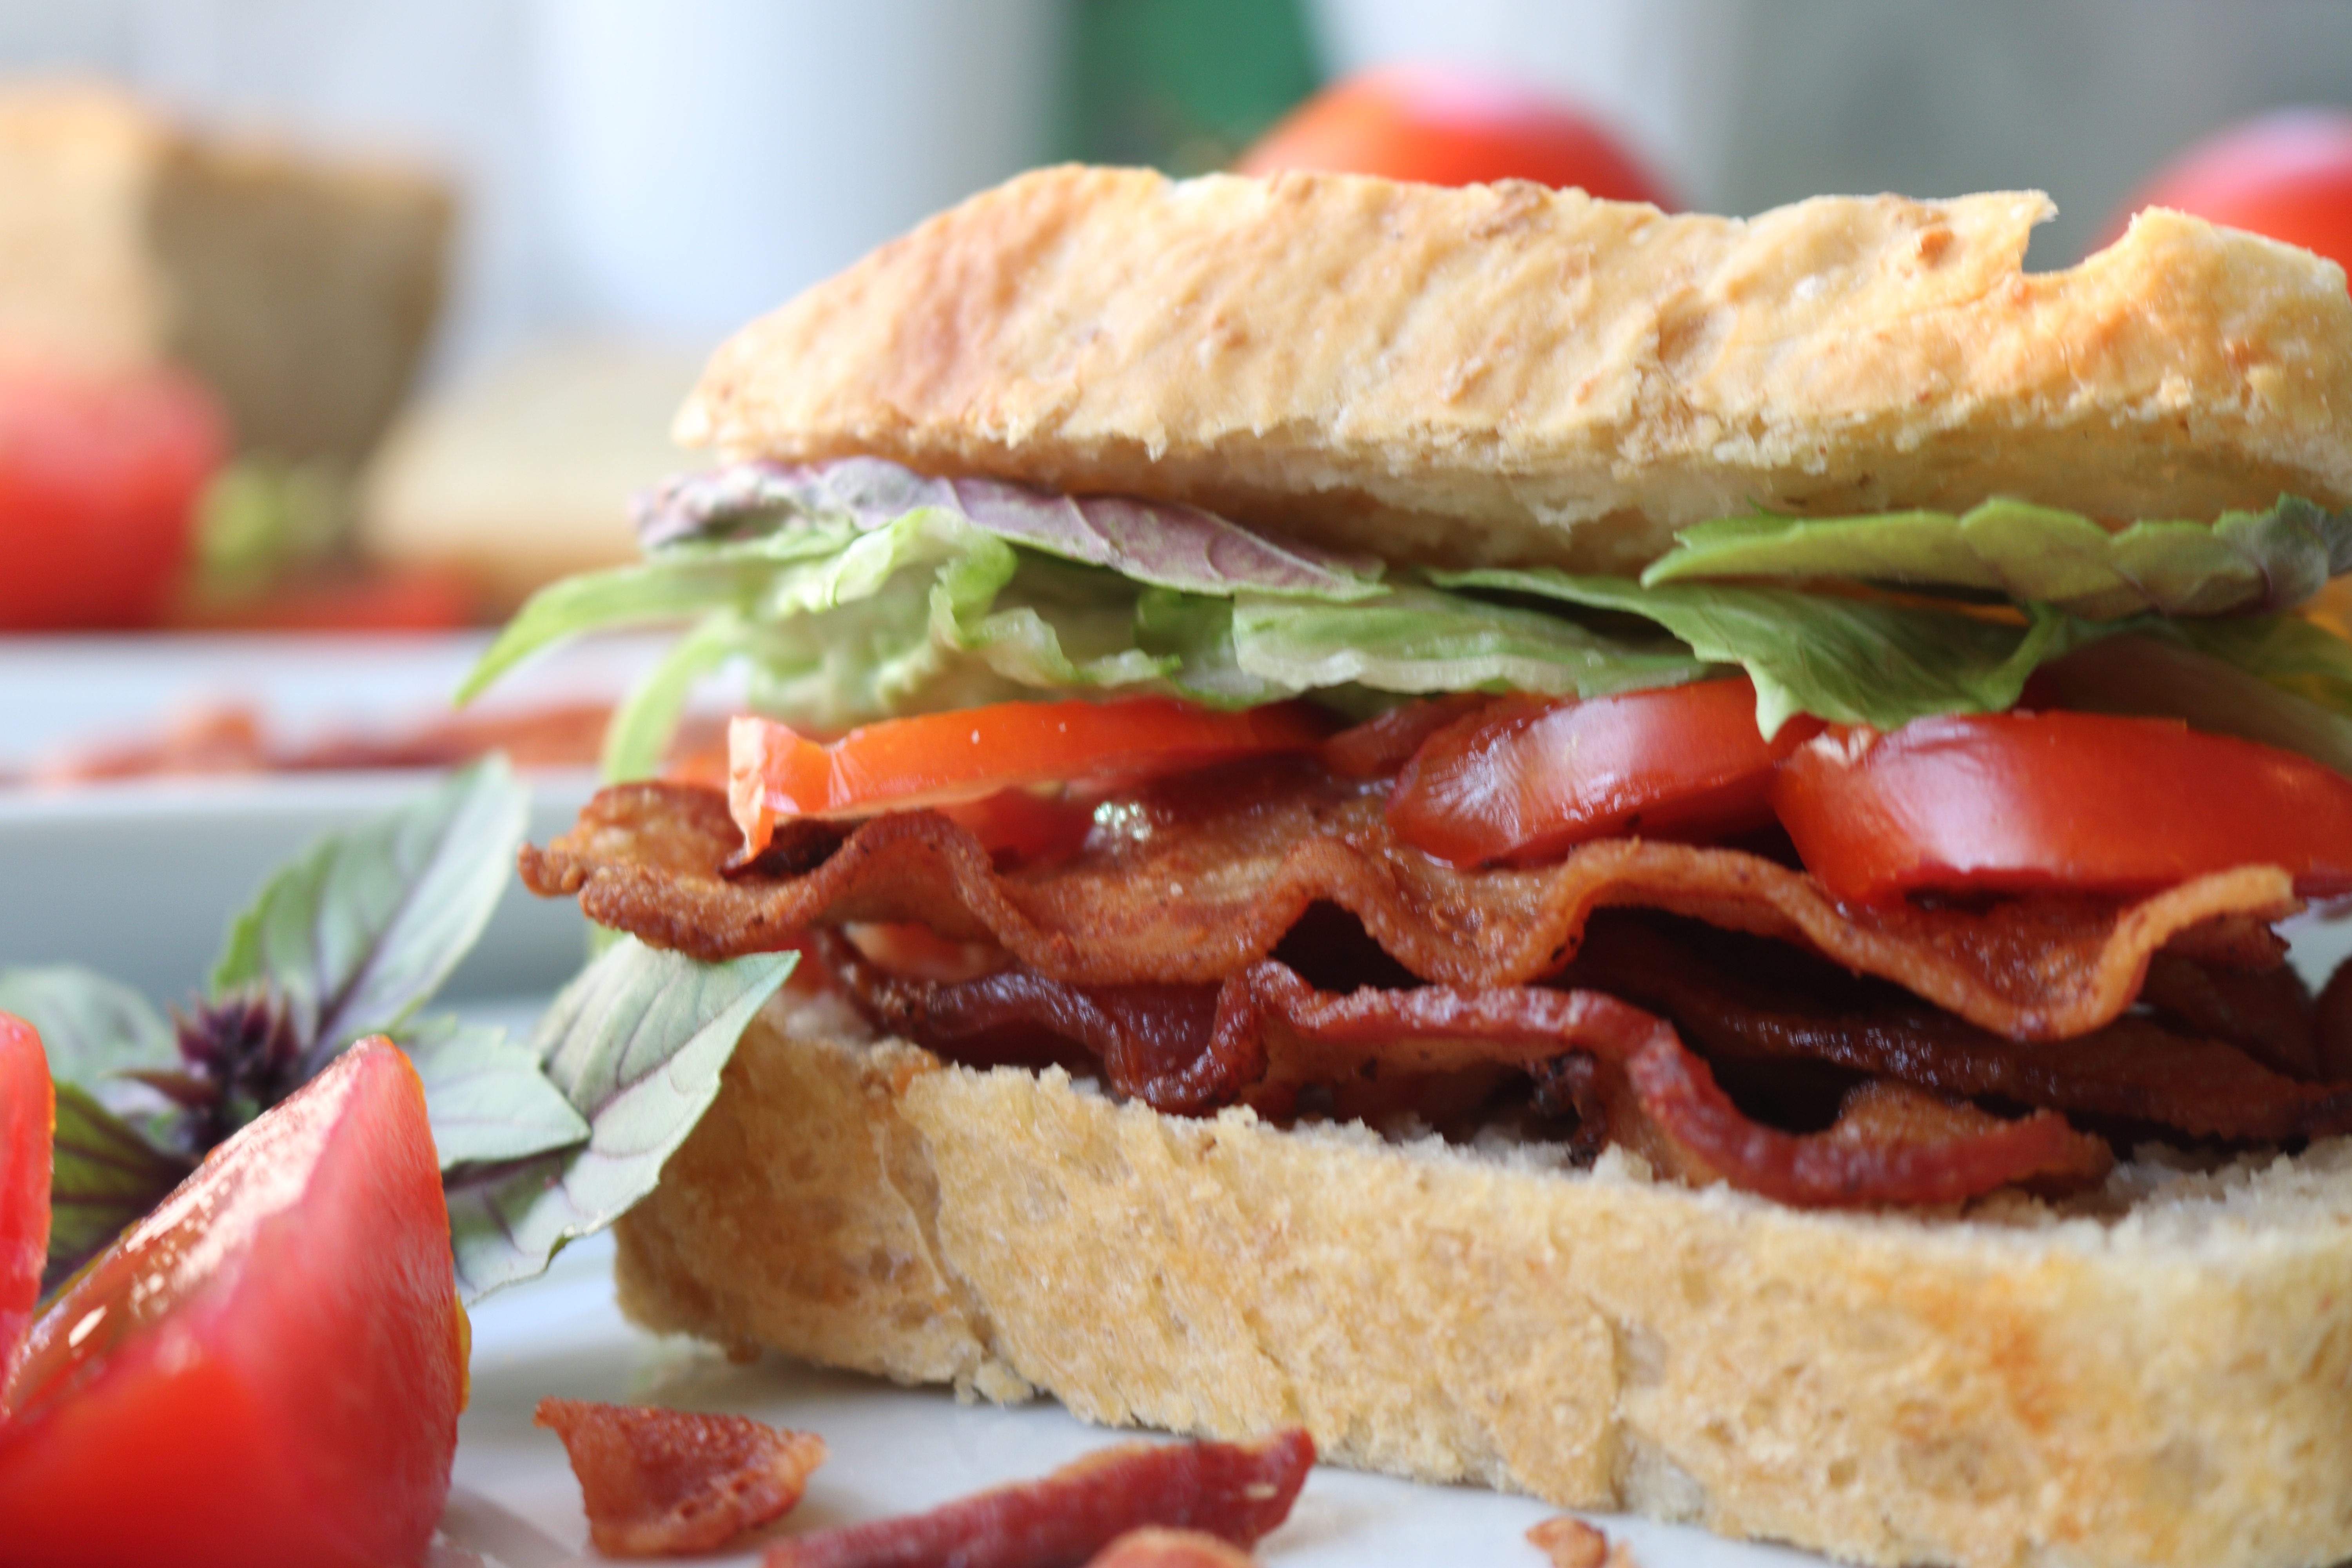 BLT with garden fresh tomatoes and homemade bread